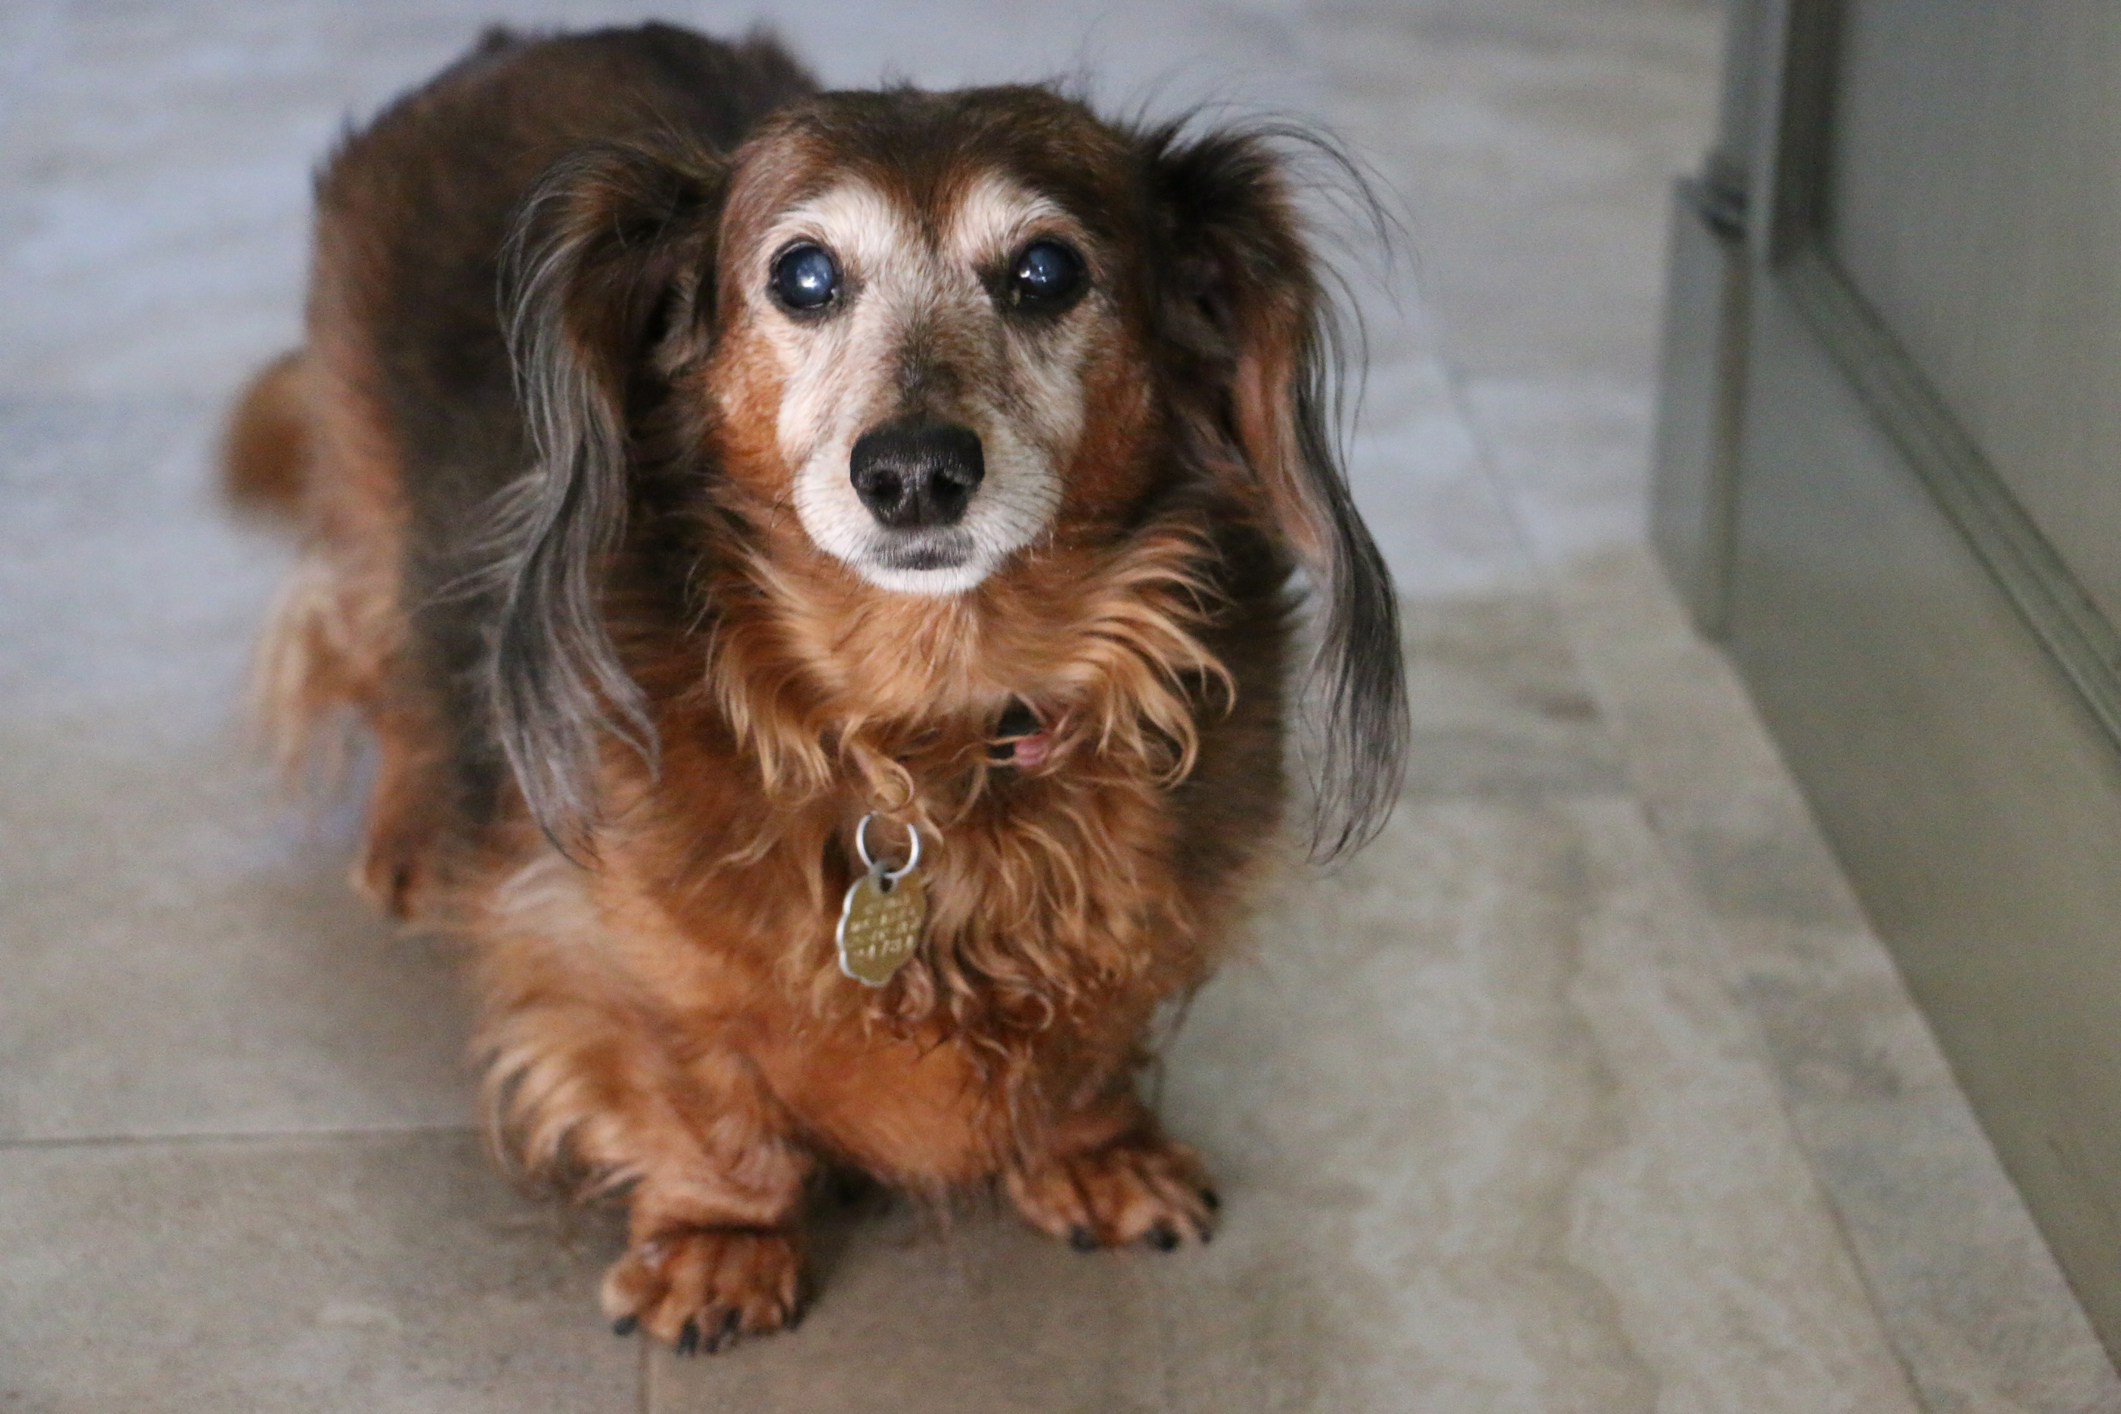 Senior dachshund with cataracts, a common condition in dogs with diabetes